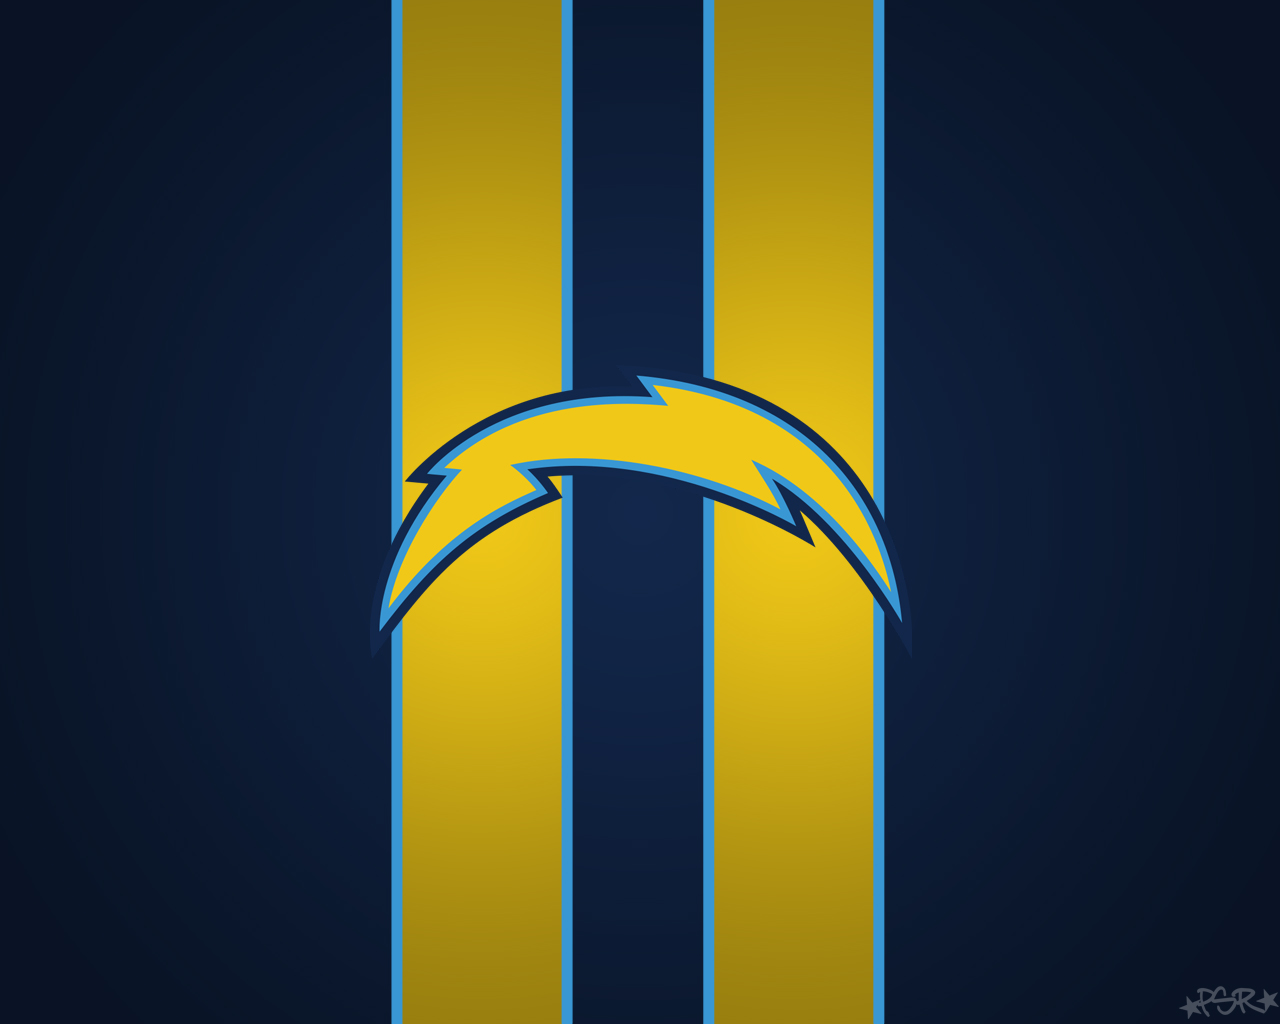 Chargers wallpaper | 1280x1024 | #2802